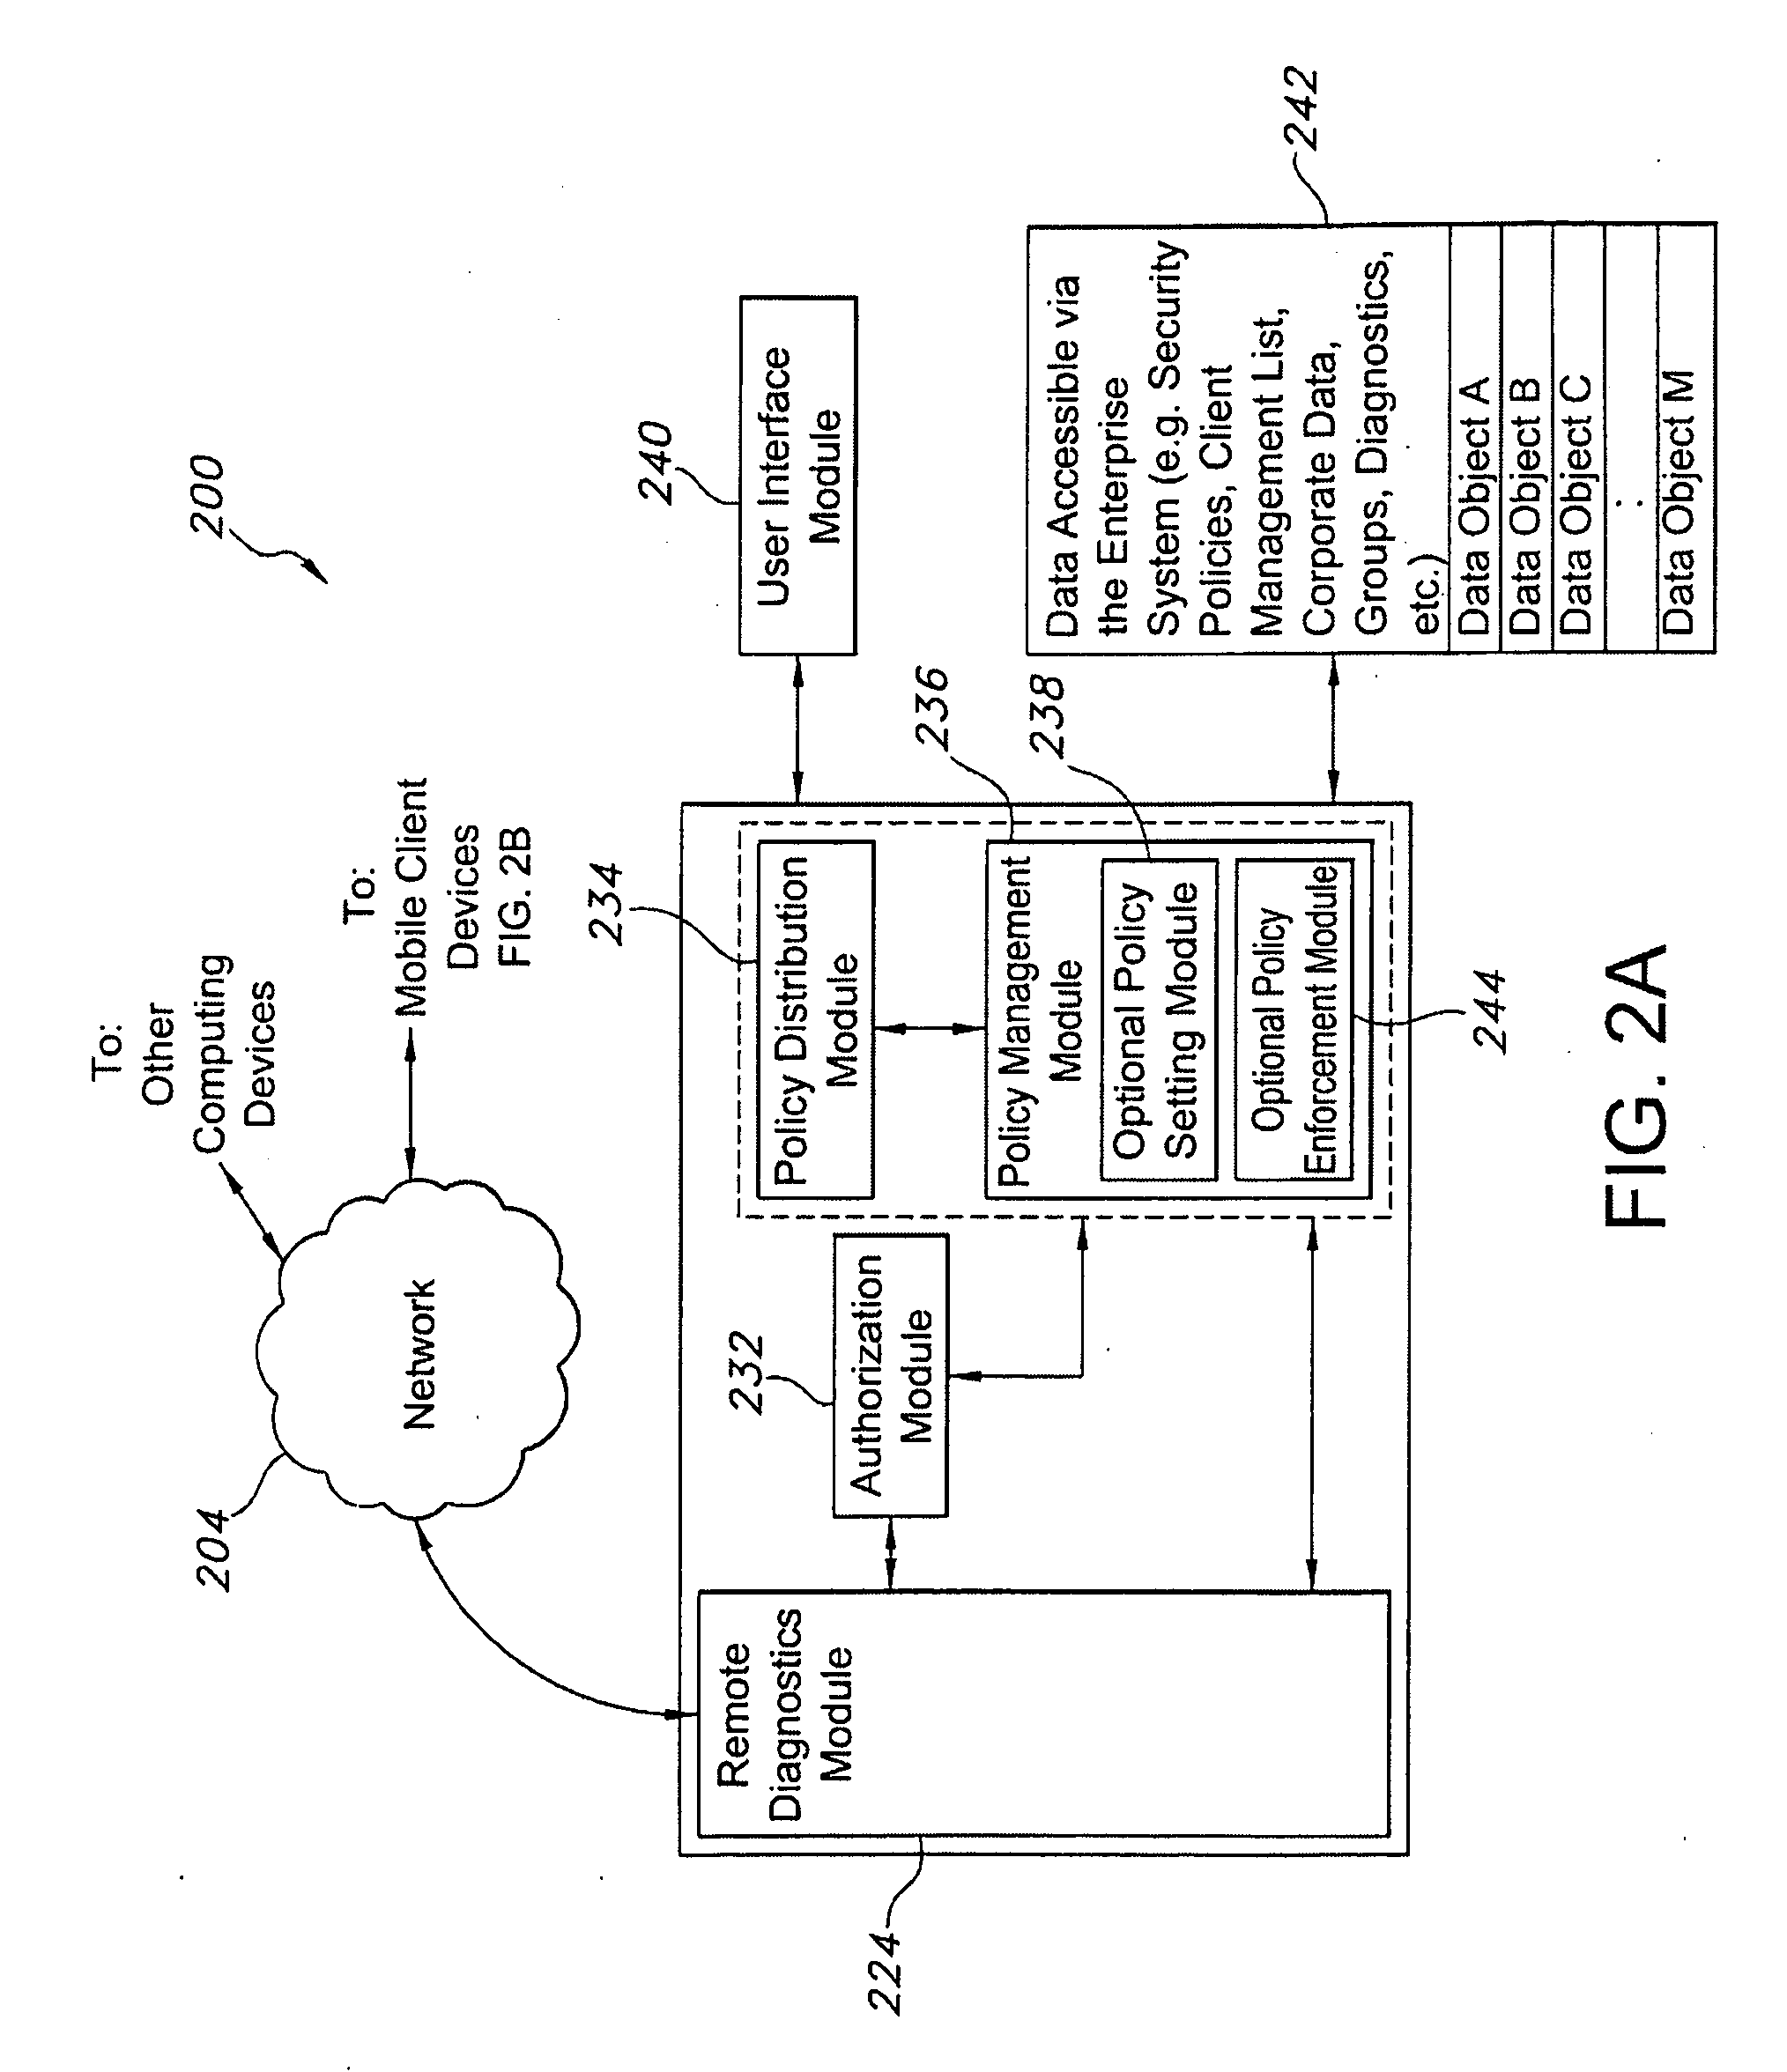 Enforcing secure internet connections for a mobile endpoint computing device